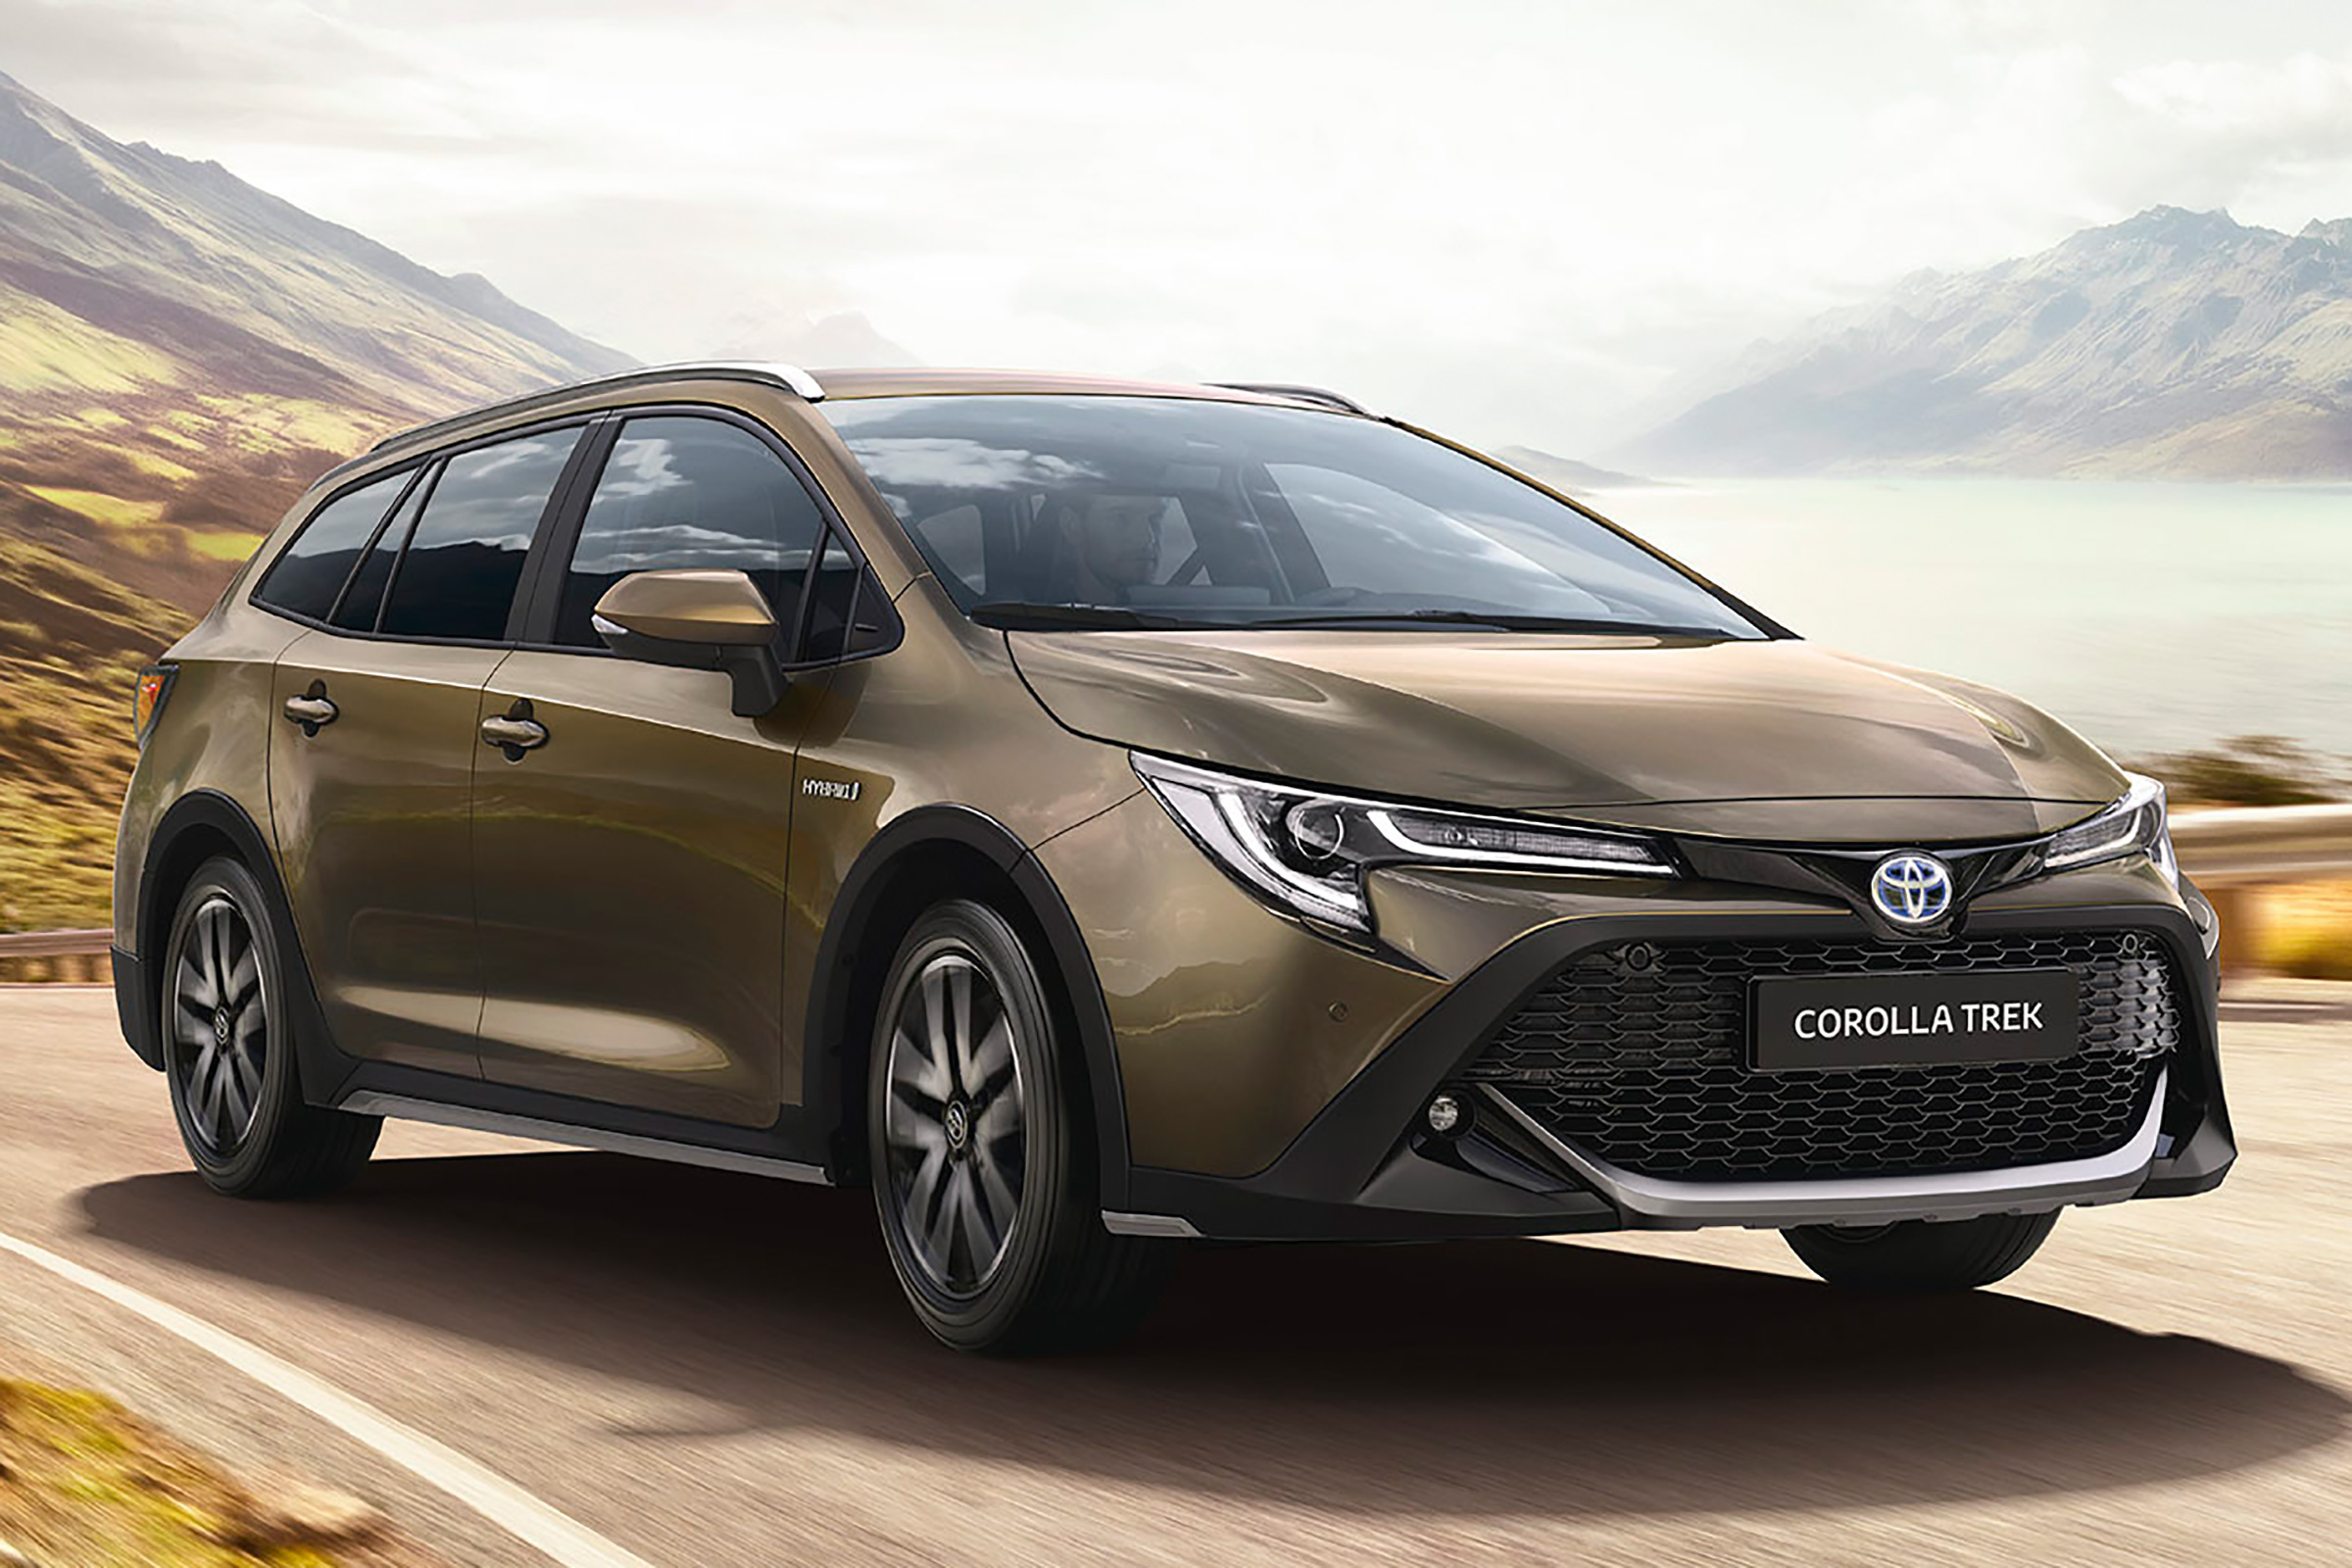 New 2019 Toyota Corolla TREK launched with rugged off-road 